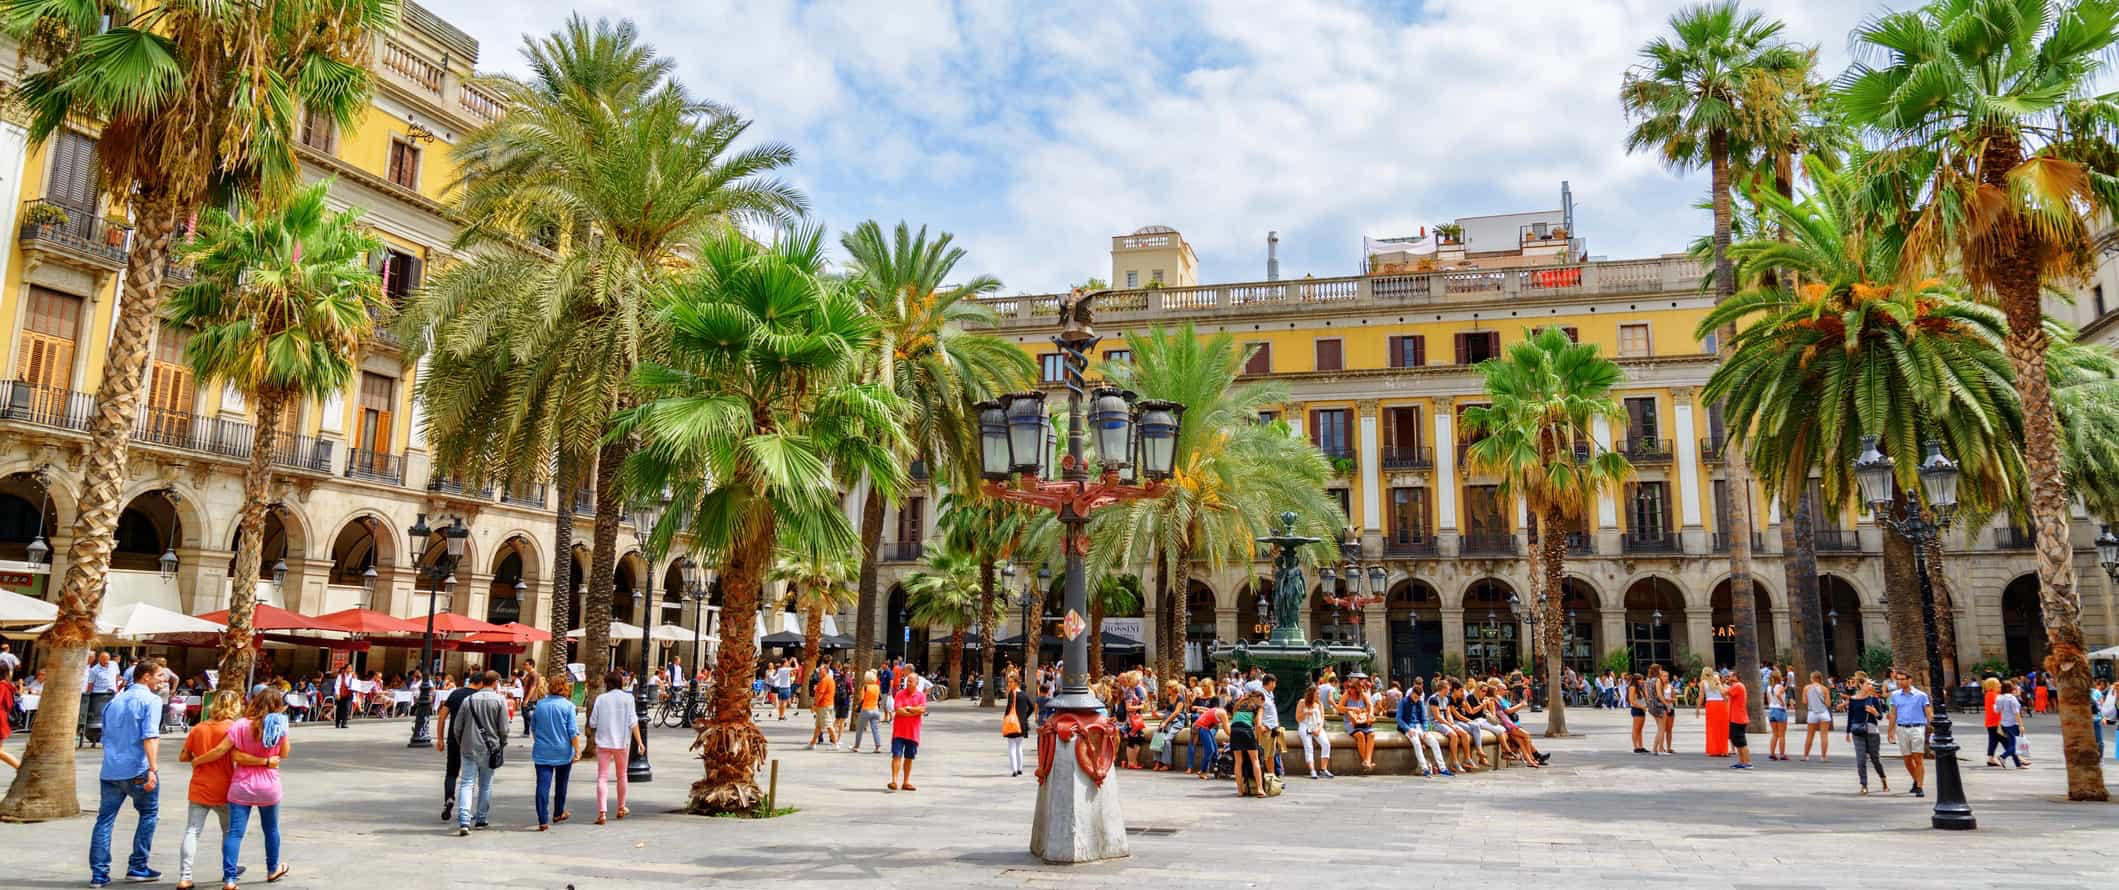 A large plaza square in the Gothic Quarter of Barcelona, Spain in the summer